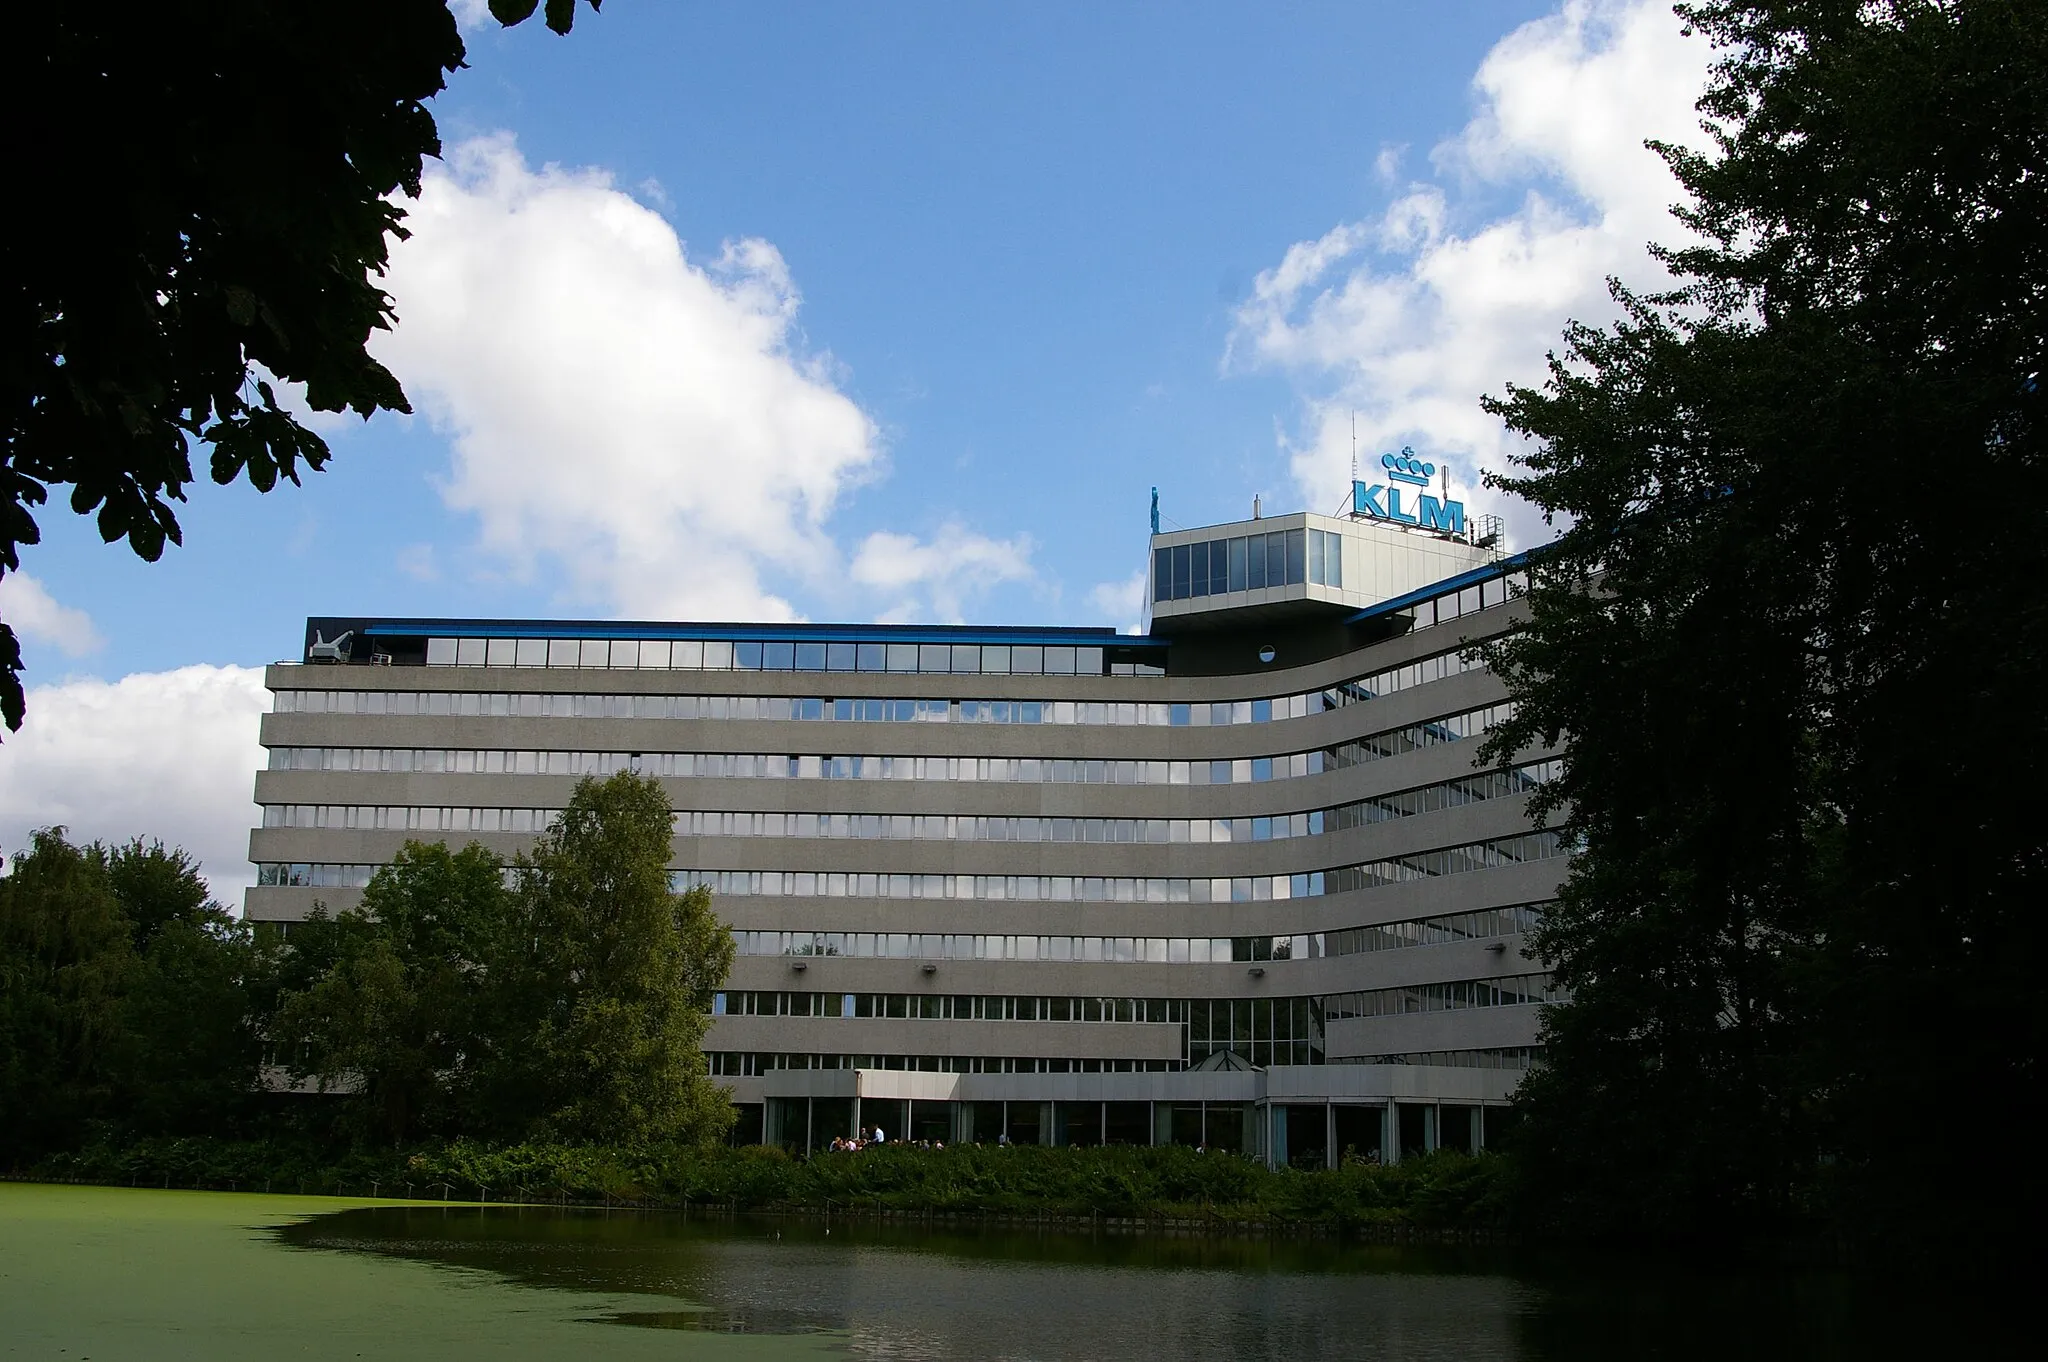 Photo showing: Head office of KLM airline in Amstelveen, the Netherlands. Picture taken on request of user WhisperToMe on the Dutch Wikipedia.